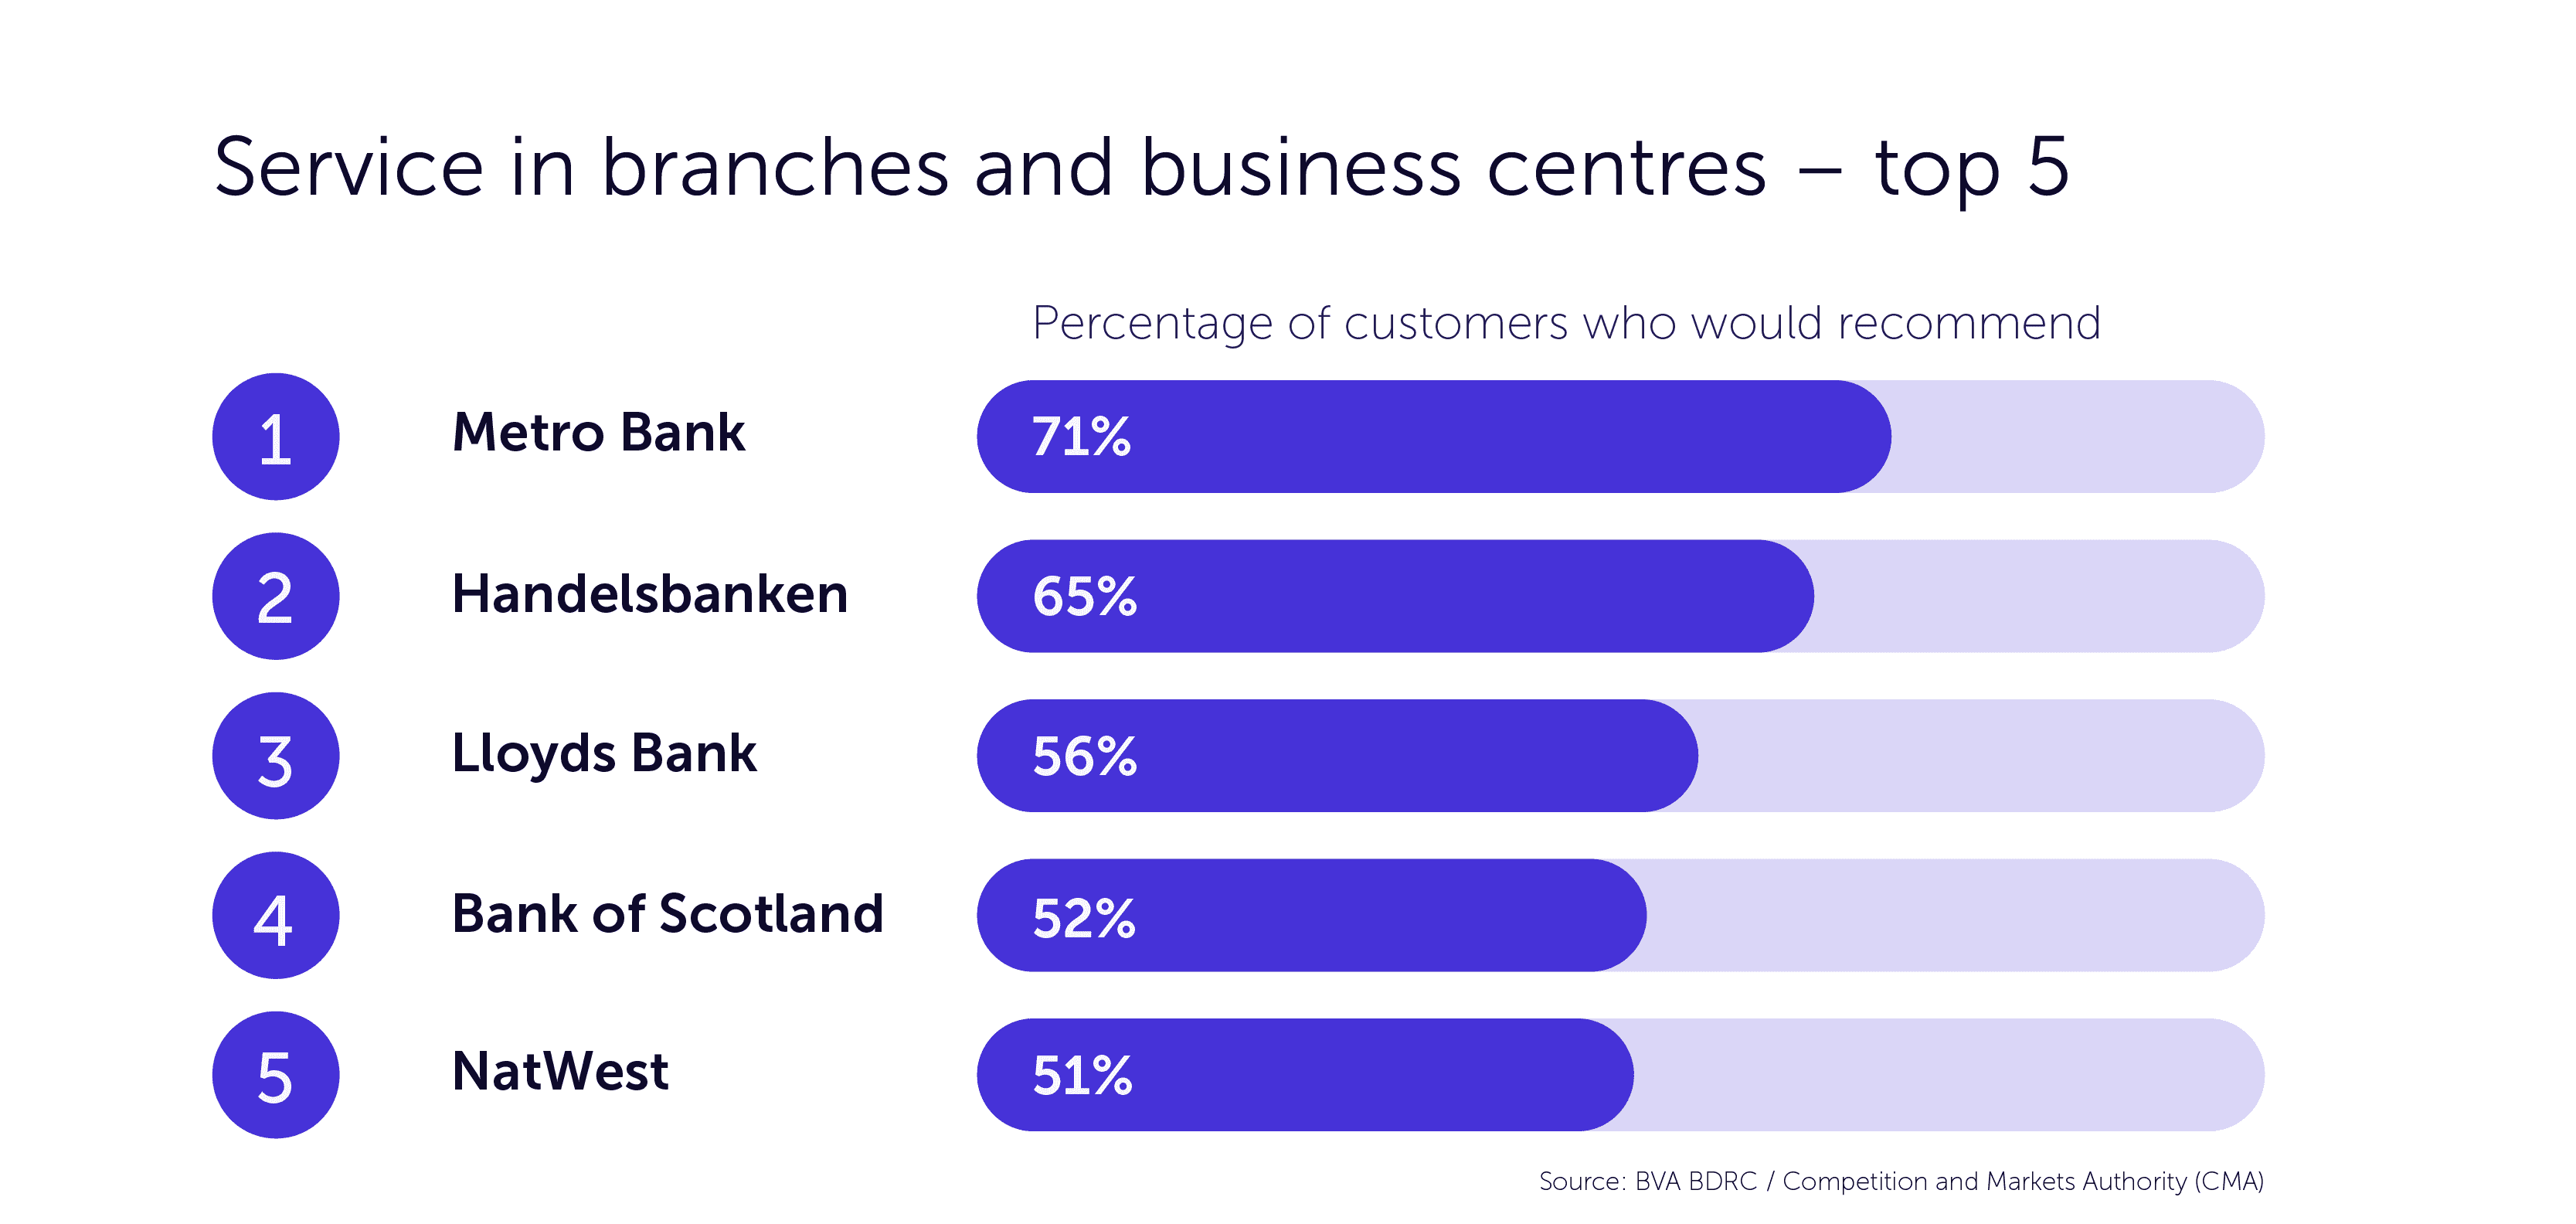 Top 5 business bank for service in branches and business centres